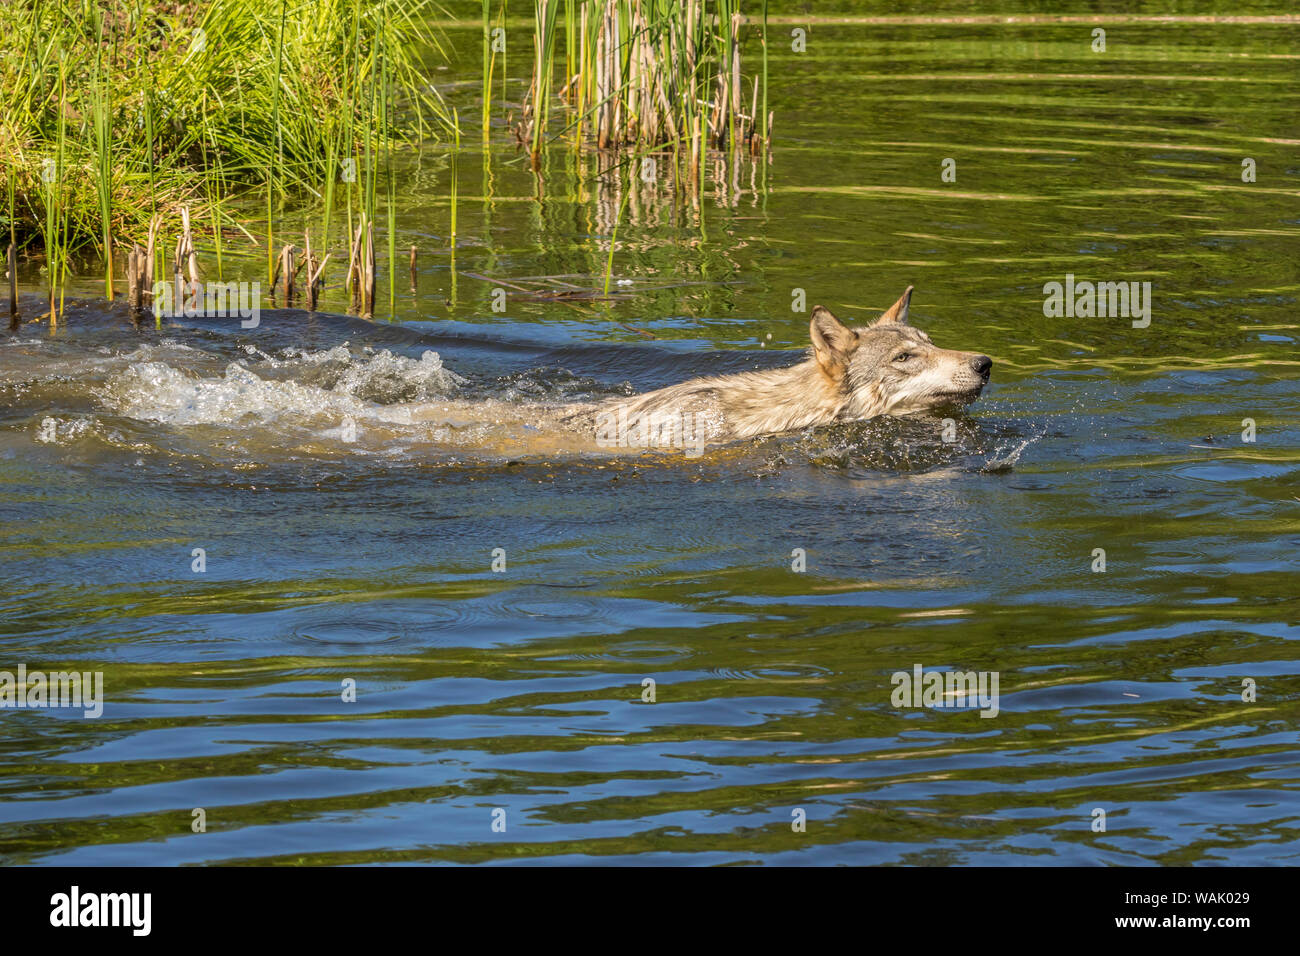 Pine County. Captive gray wolf swimming. Credit as: Cathy and Gordon Illg / Jaynes Gallery / DanitaDelimont.com Stock Photo